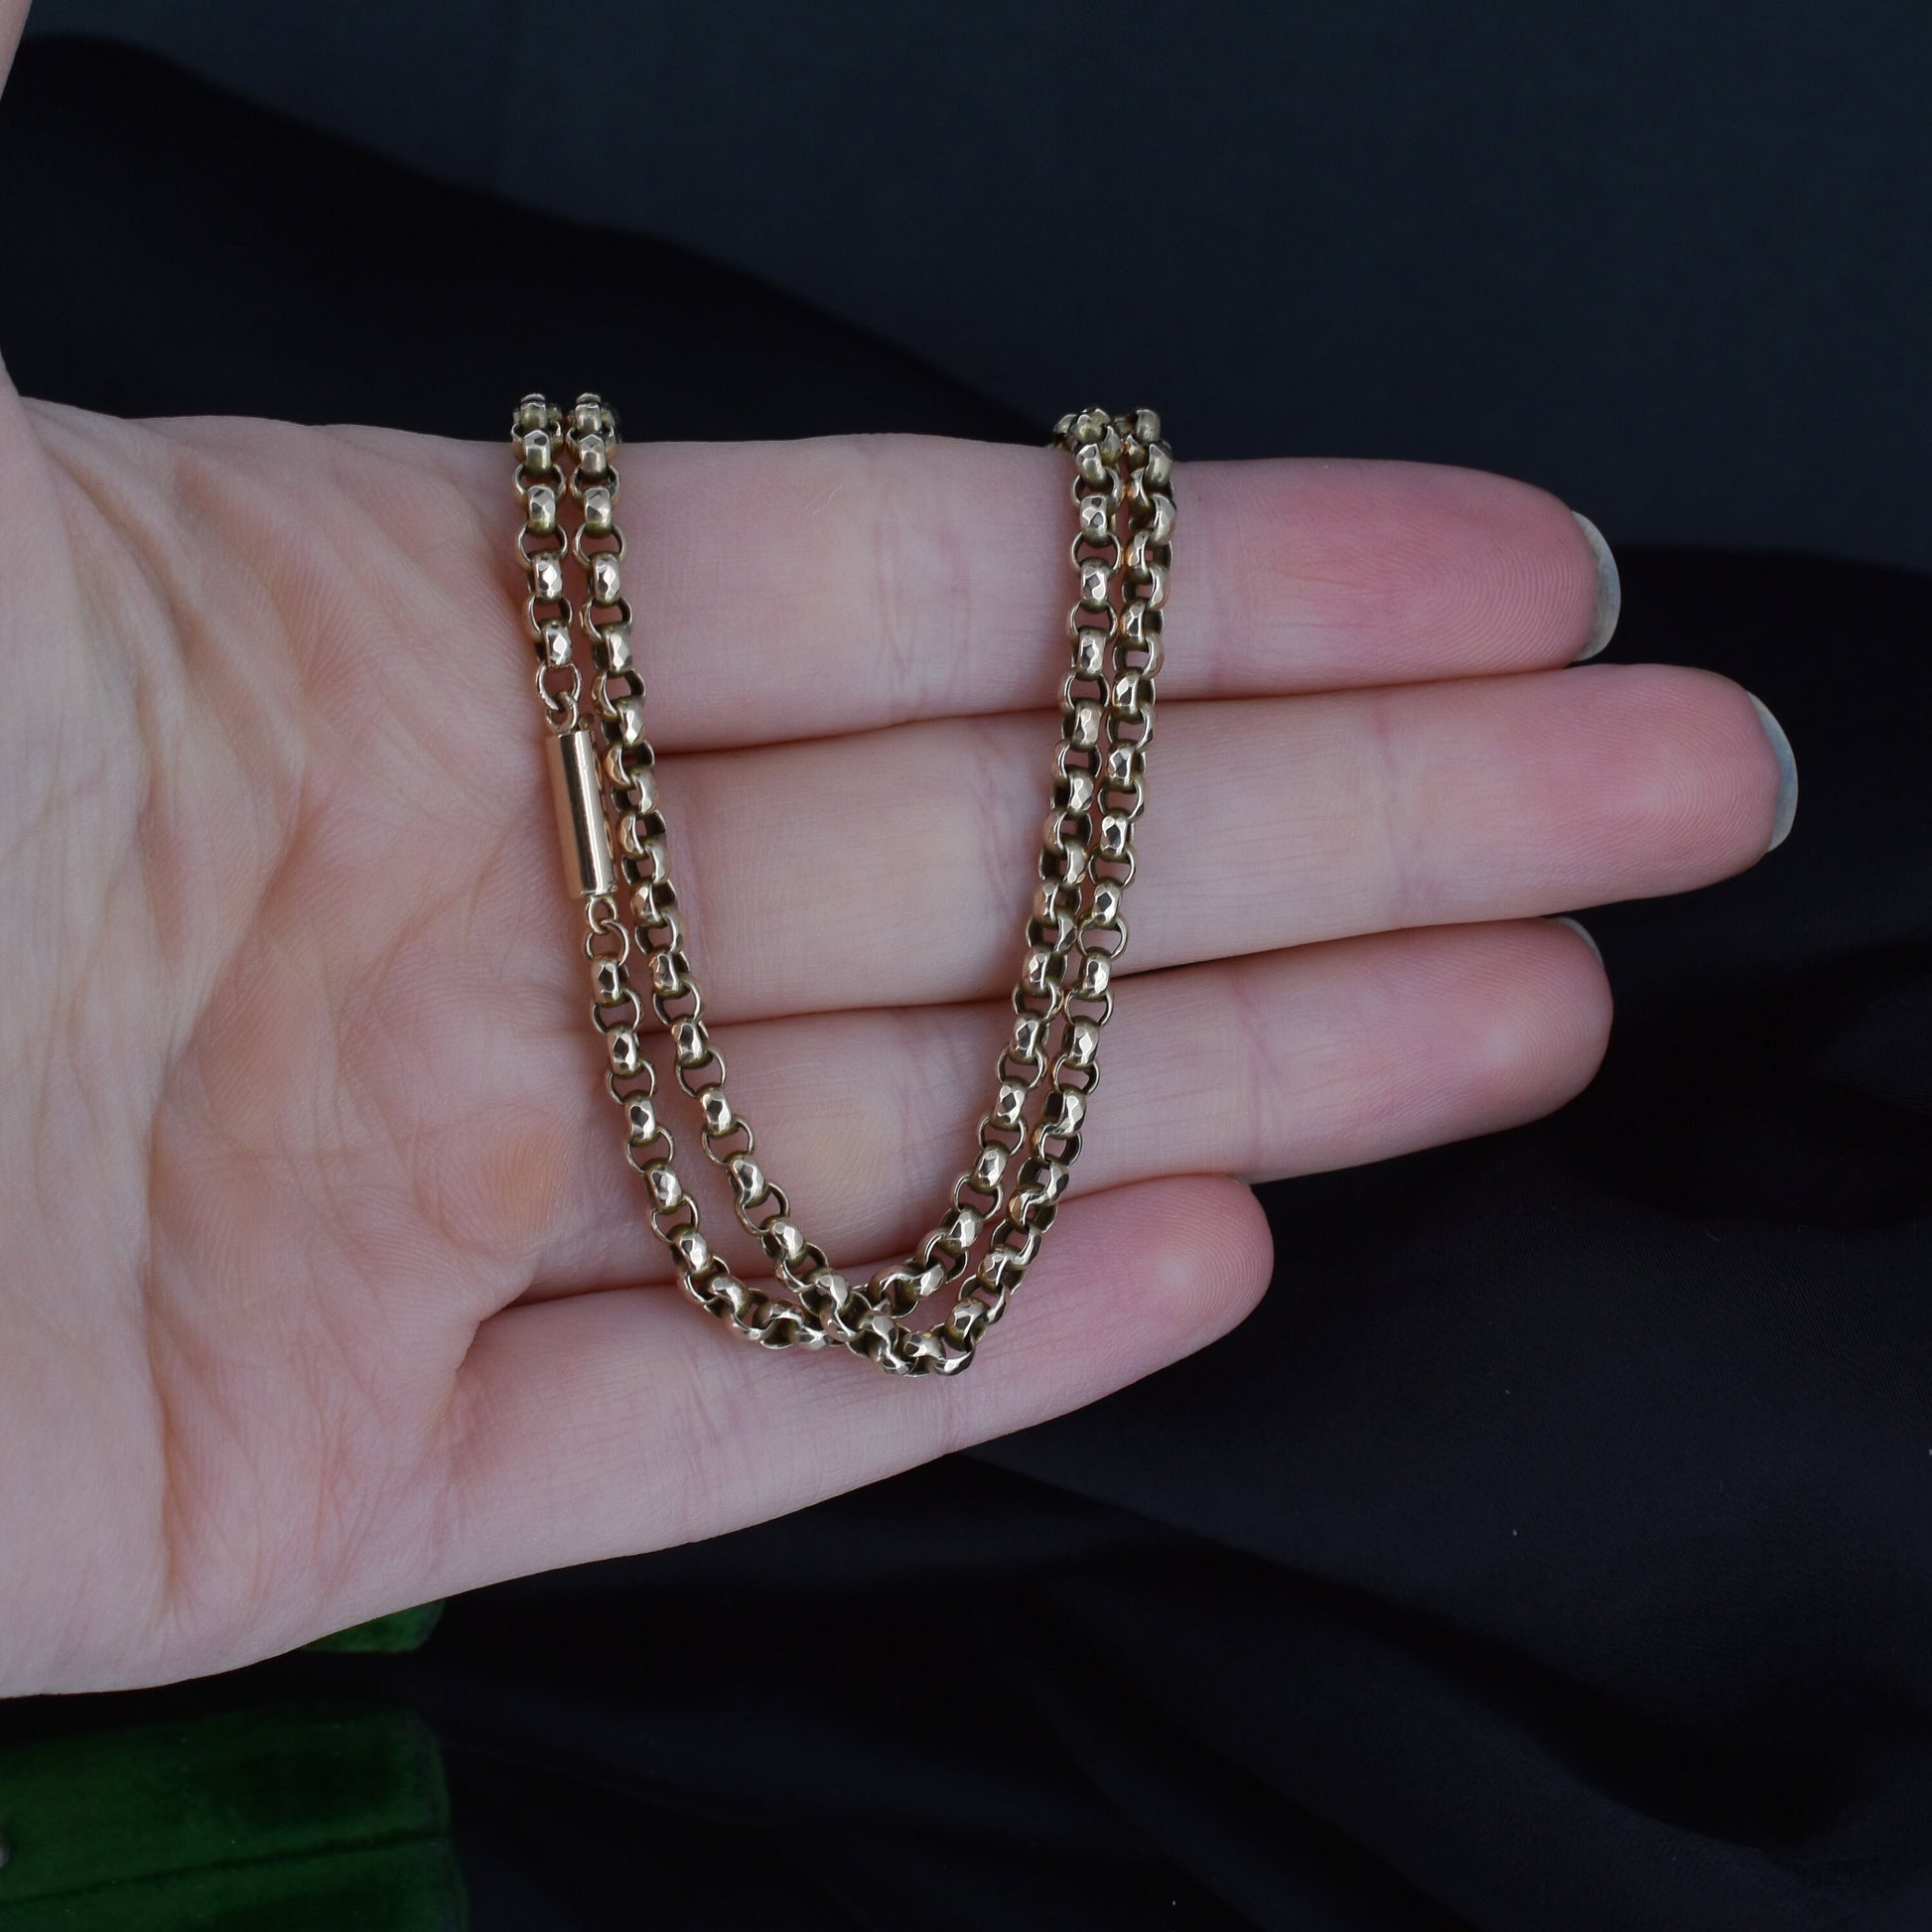 Antique Victorian 9ct Gold Faceted Belcher Link Chain Necklace with Barrel Clasp | 19"